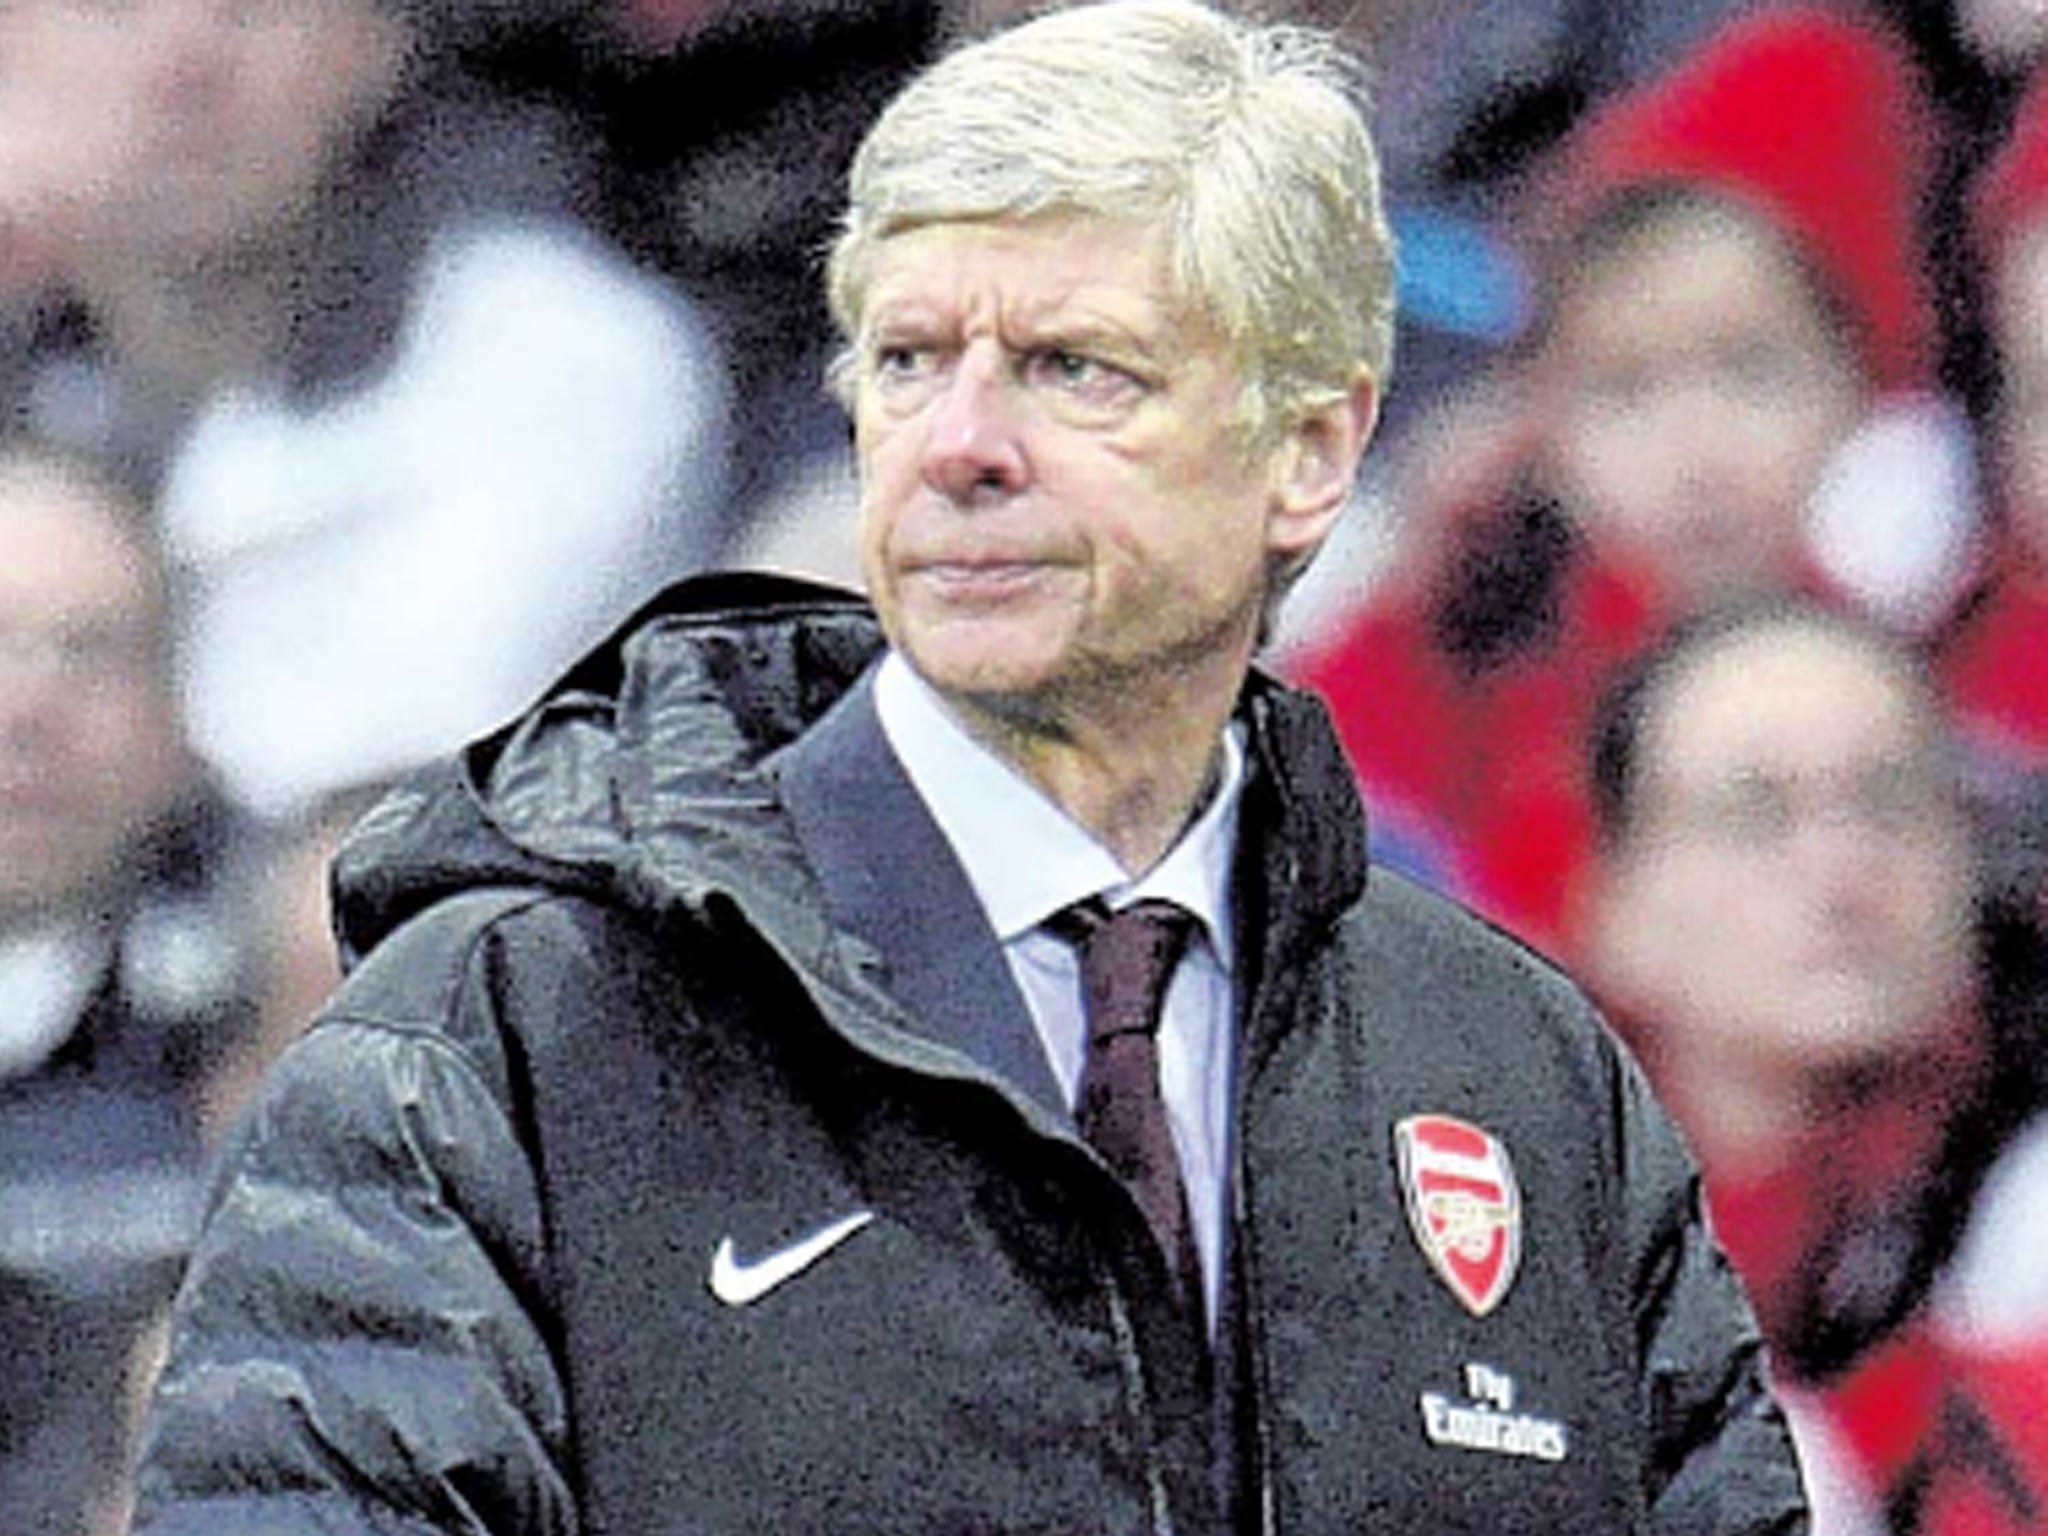 Arsène Wenger watches Arsenal’s FA Cup defeat to Blackburn